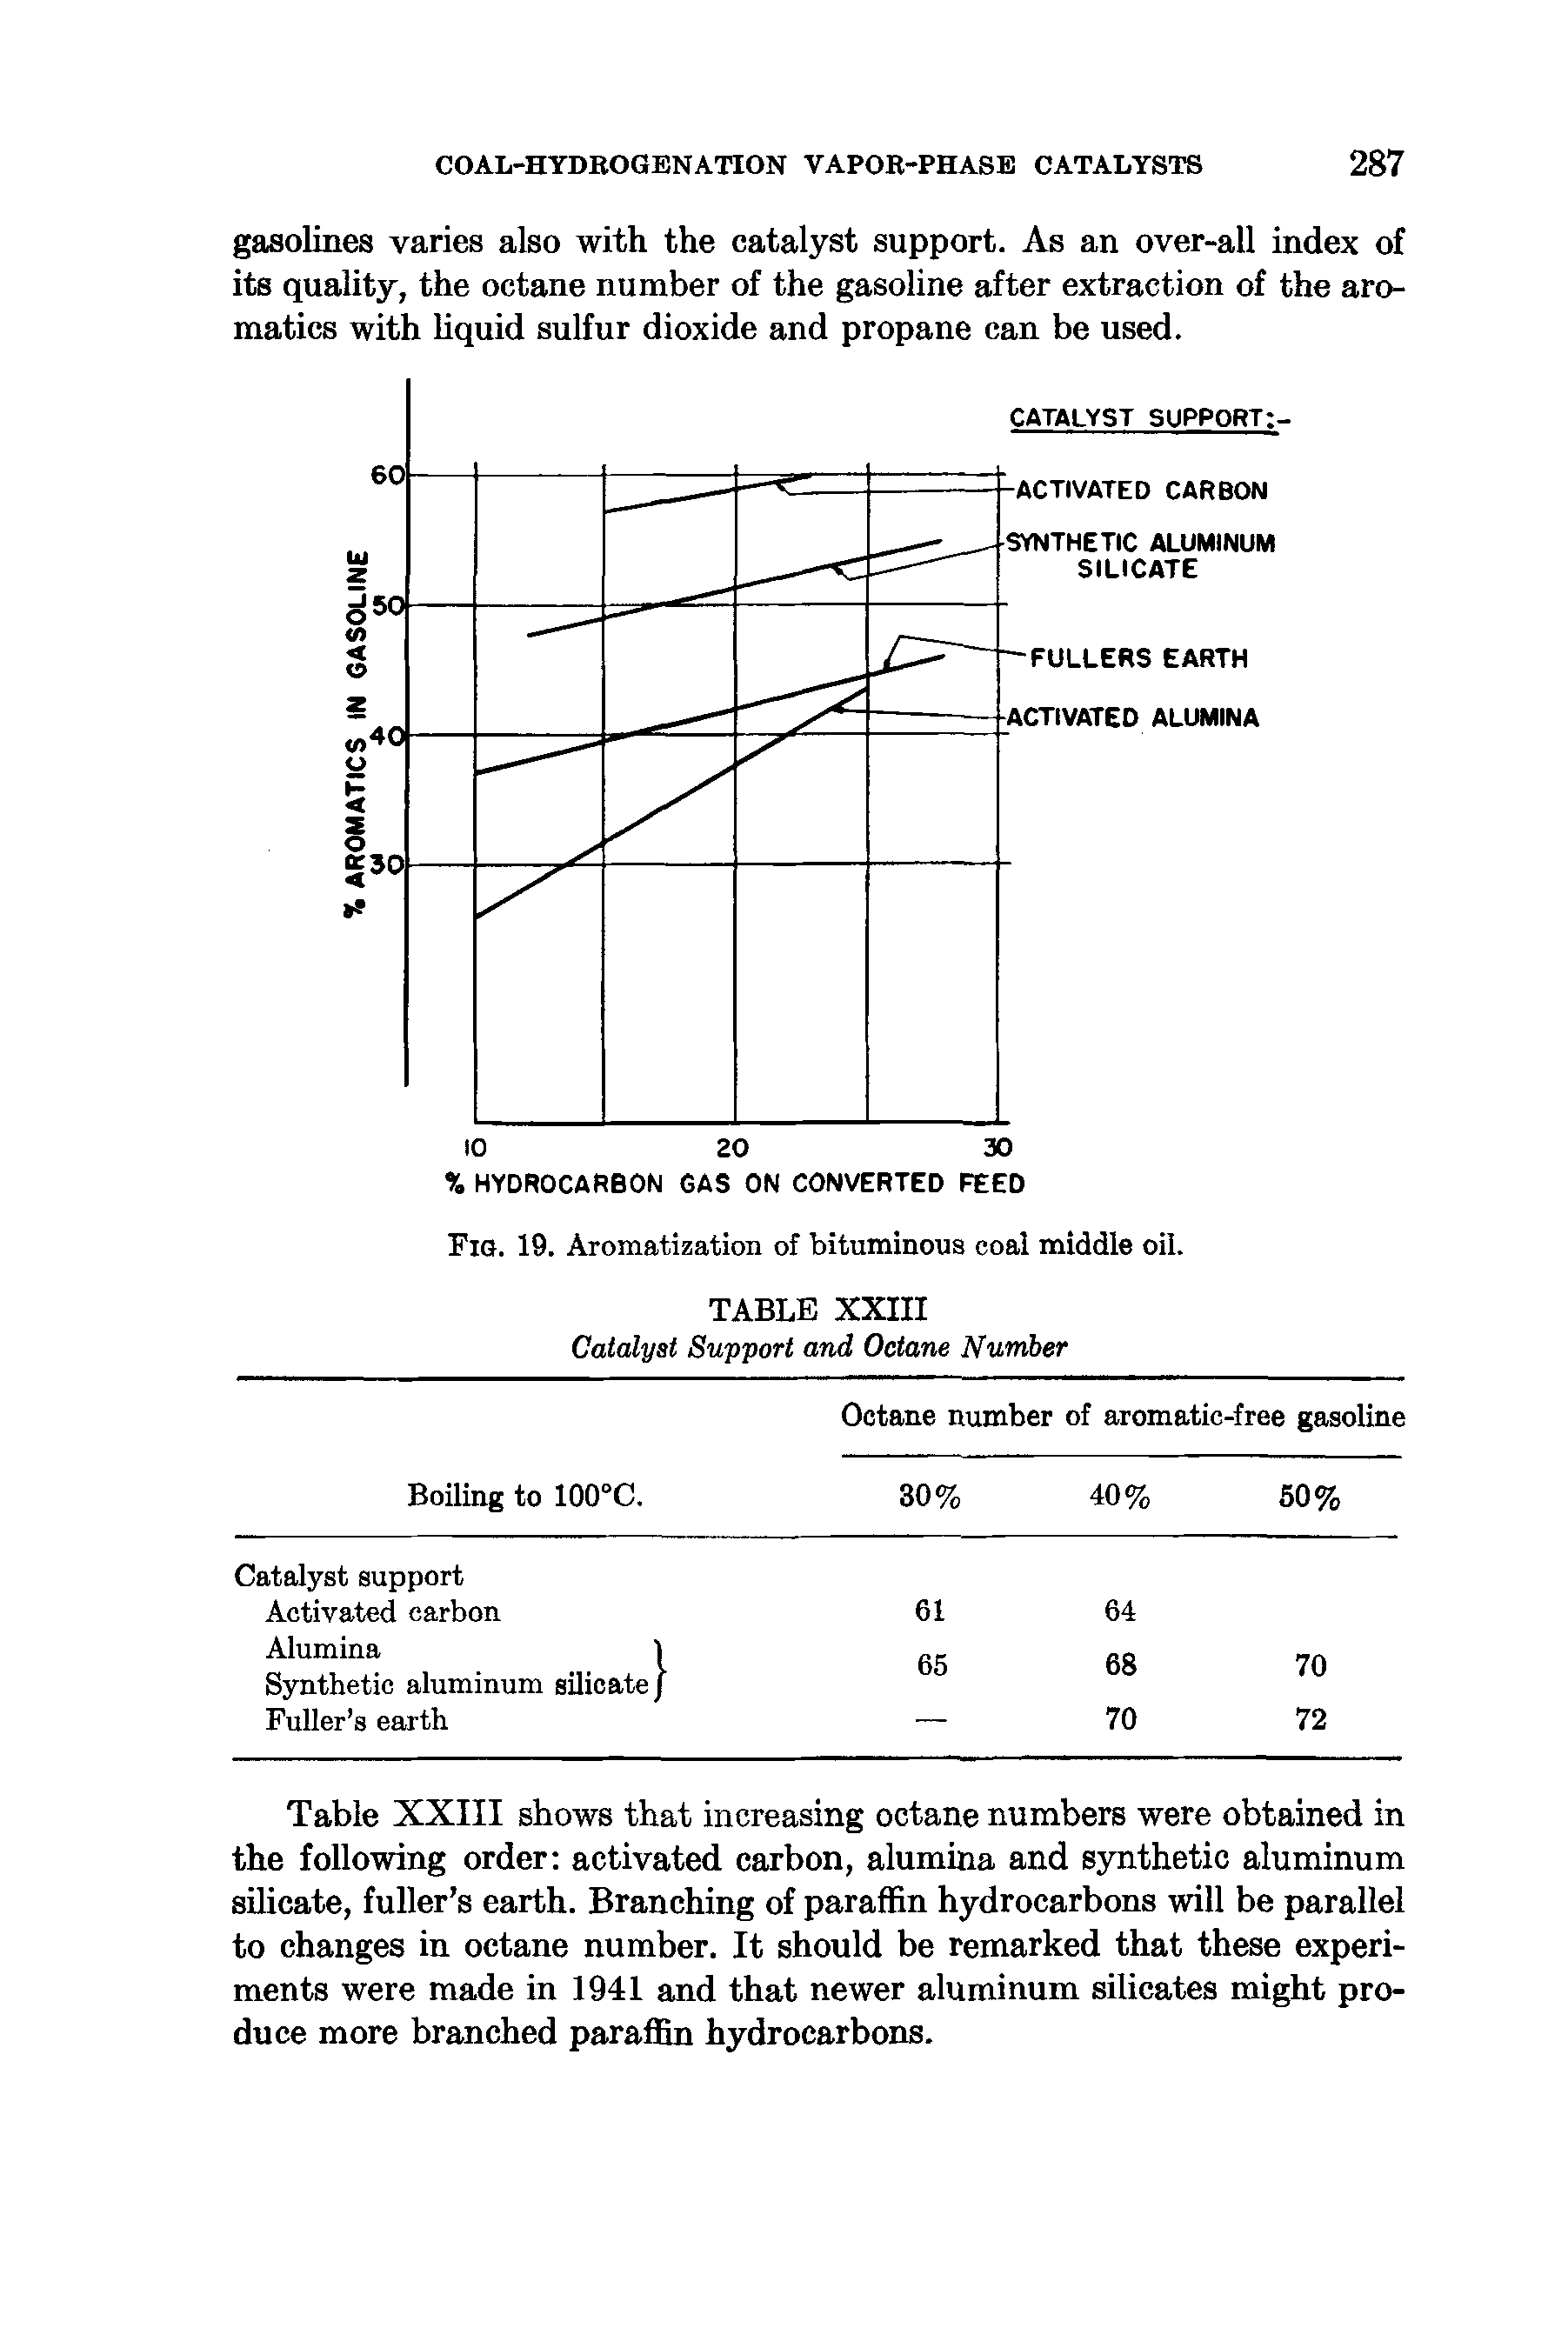 Table XXIII shows that increasing octane numbers were obtained in the following order activated carbon, alumina and synthetic aluminum silicate, fuller s earth. Branching of paraffin hydrocarbons will be parallel to changes in octane number. It should be remarked that these experiments were made in 1941 and that newer aluminum silicates might produce more branched paraffin hydrocarbons.